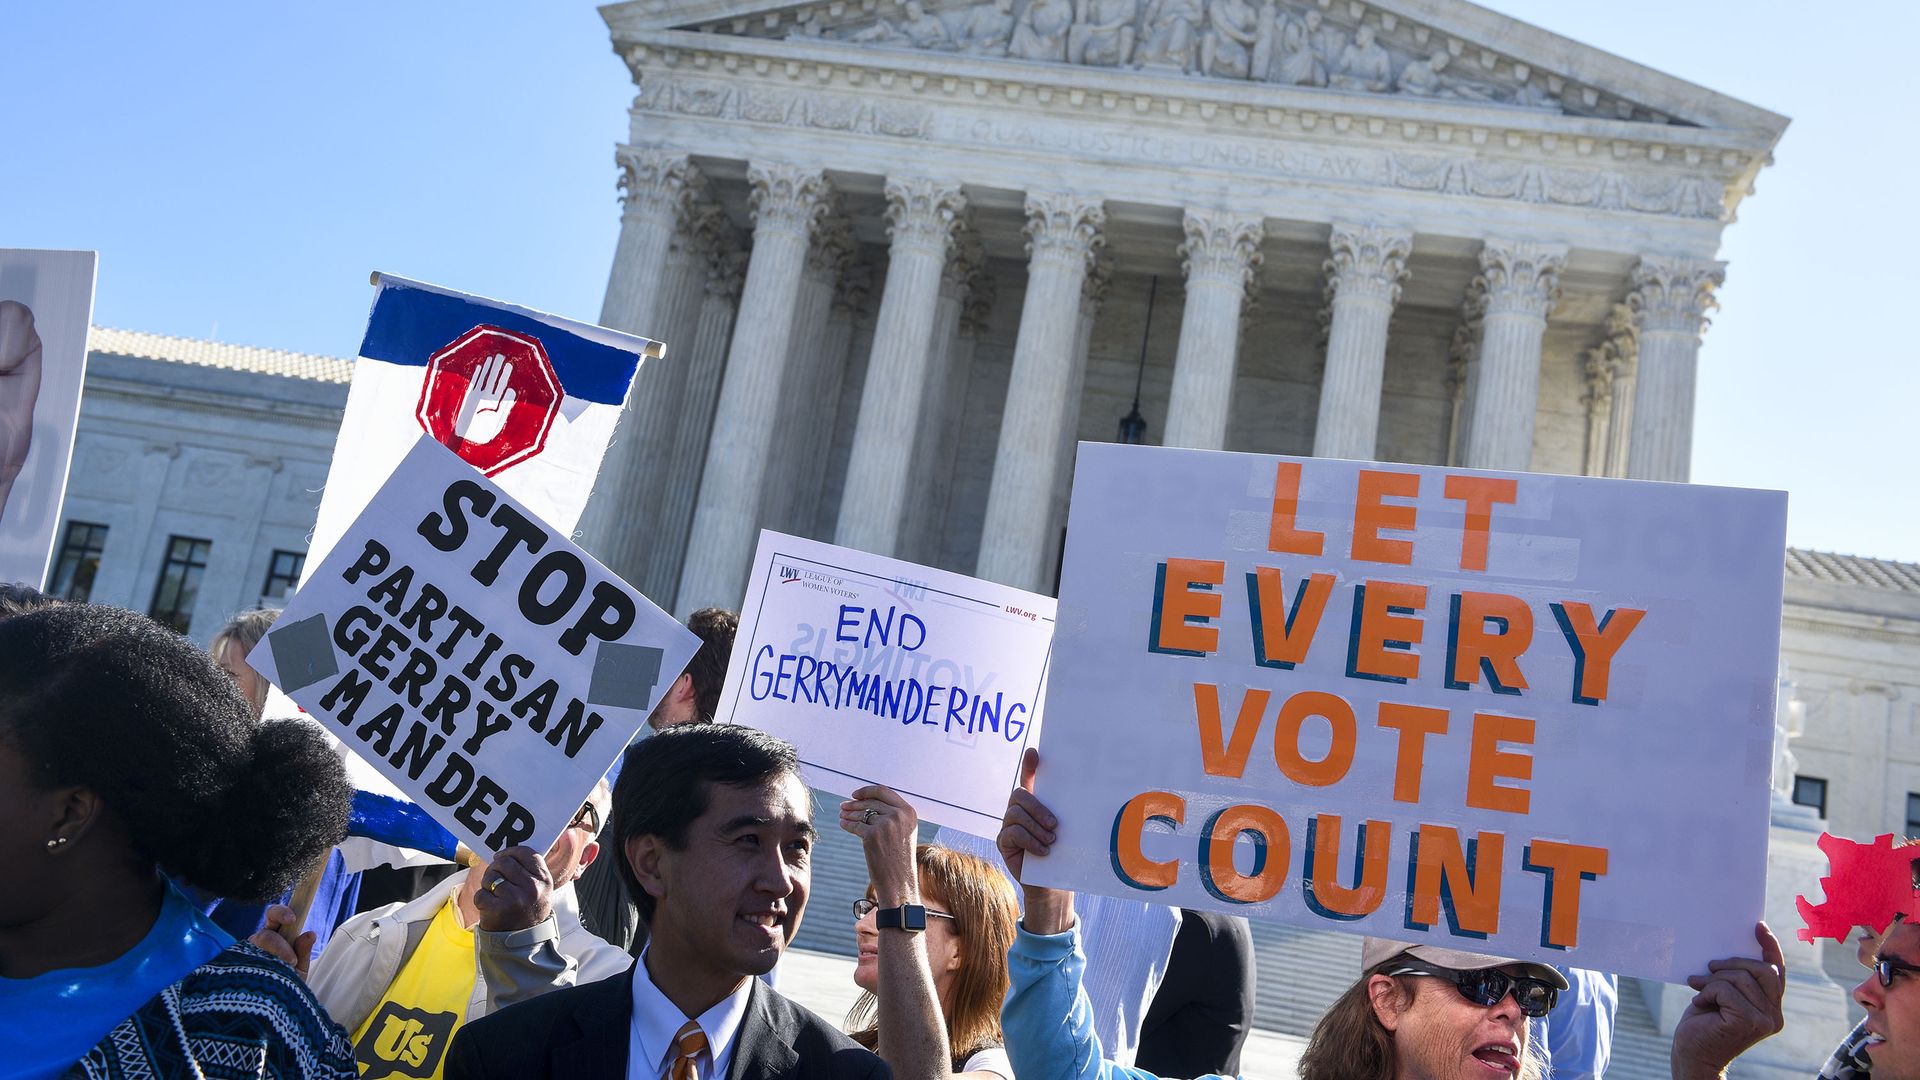 Protesters wave anti-gerrymandering signs outside the Supreme Court building